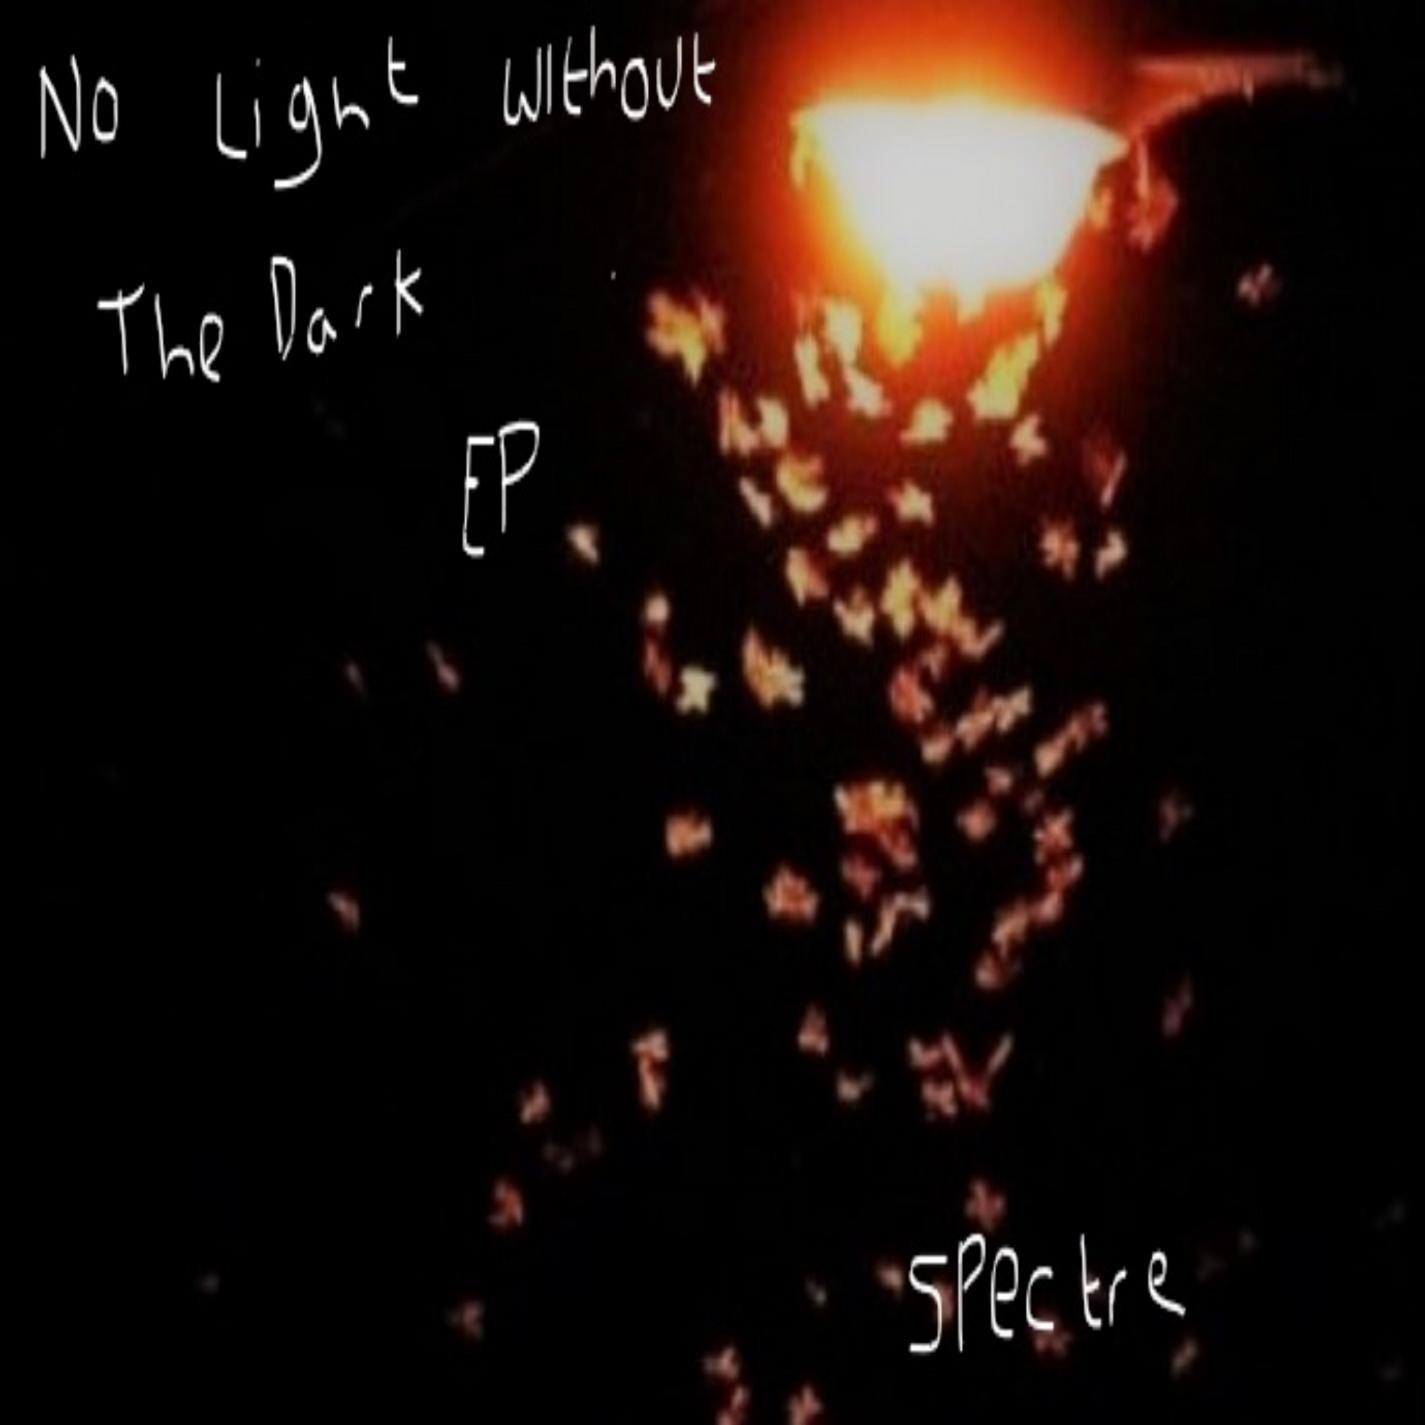 No Light Without the Dark Ep